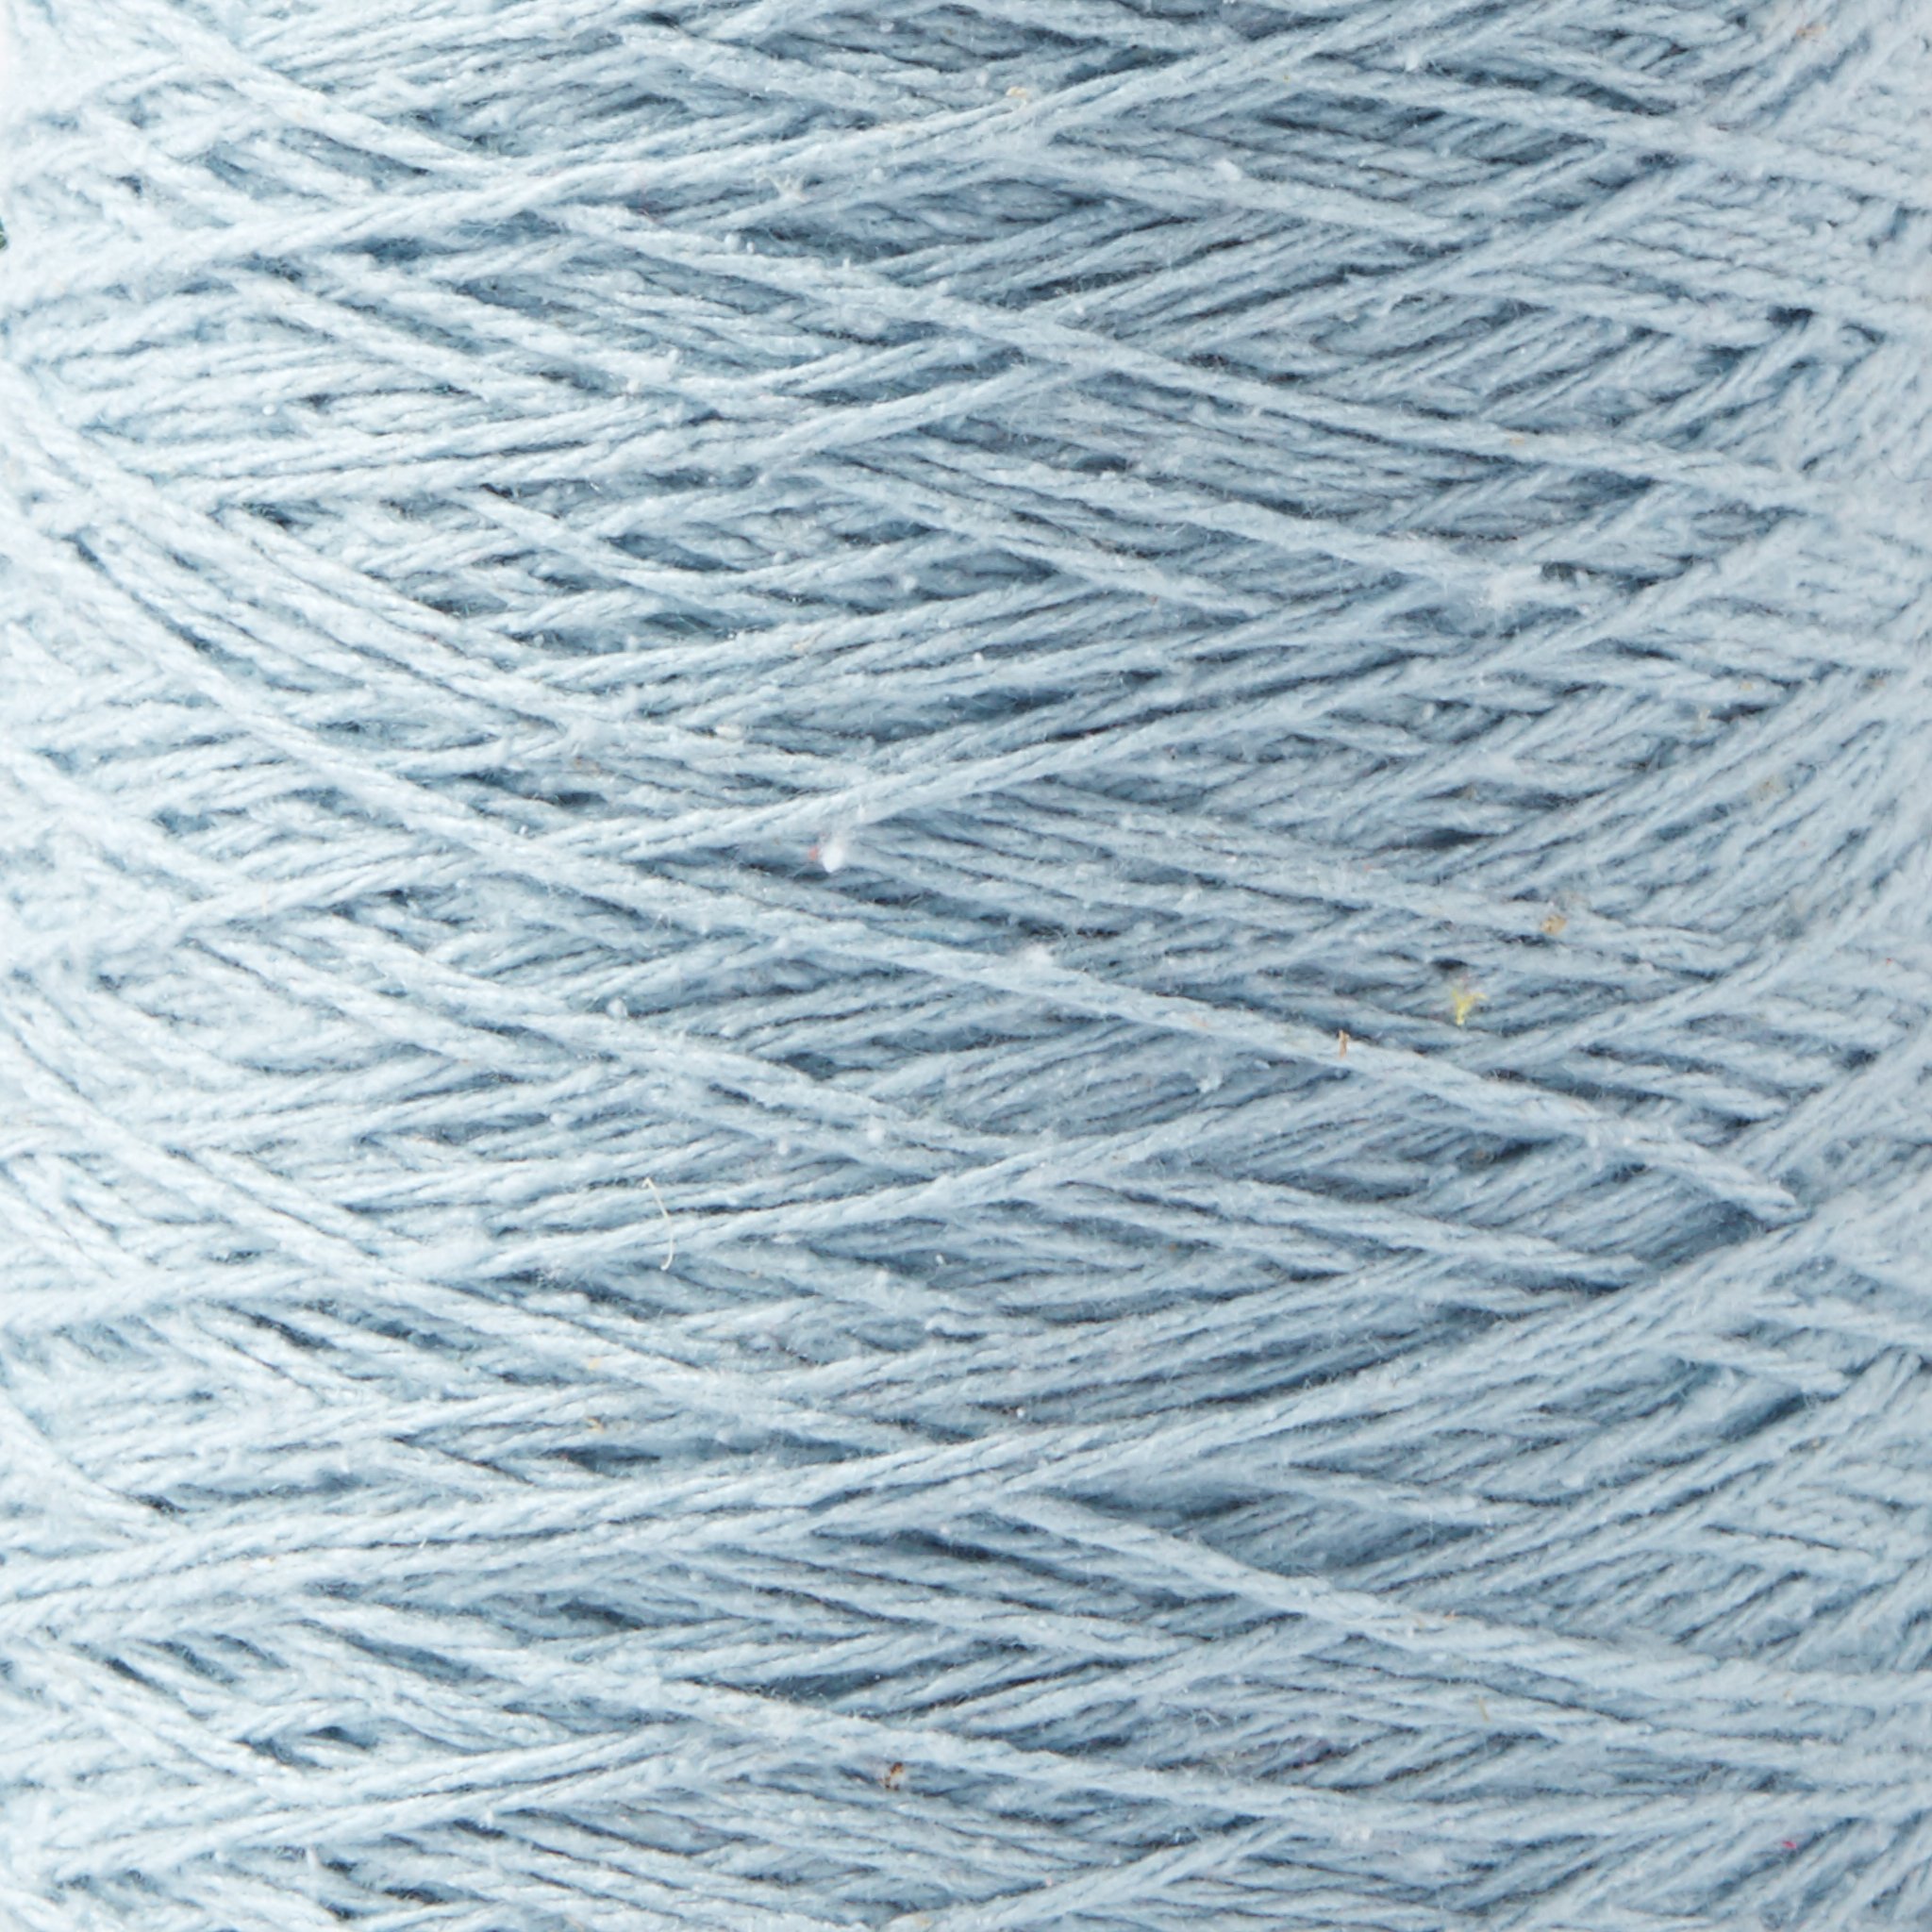 Silk noil and wool – Broad in the seams